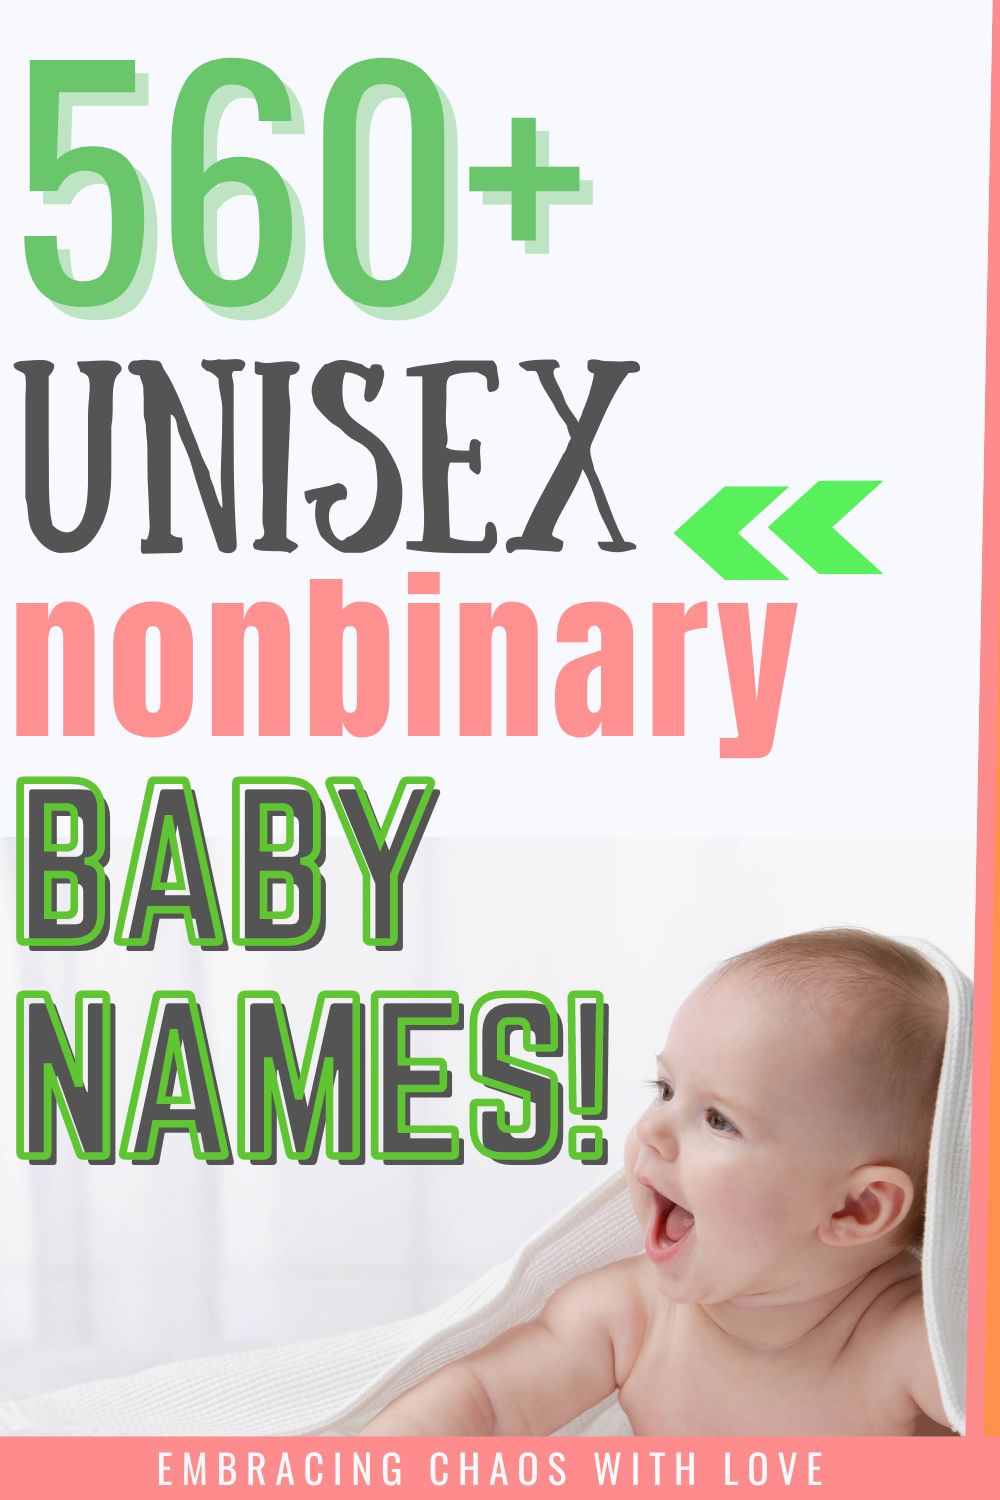 Awesome Gender Neutral and Nonbinary Names with Origin and Meaning